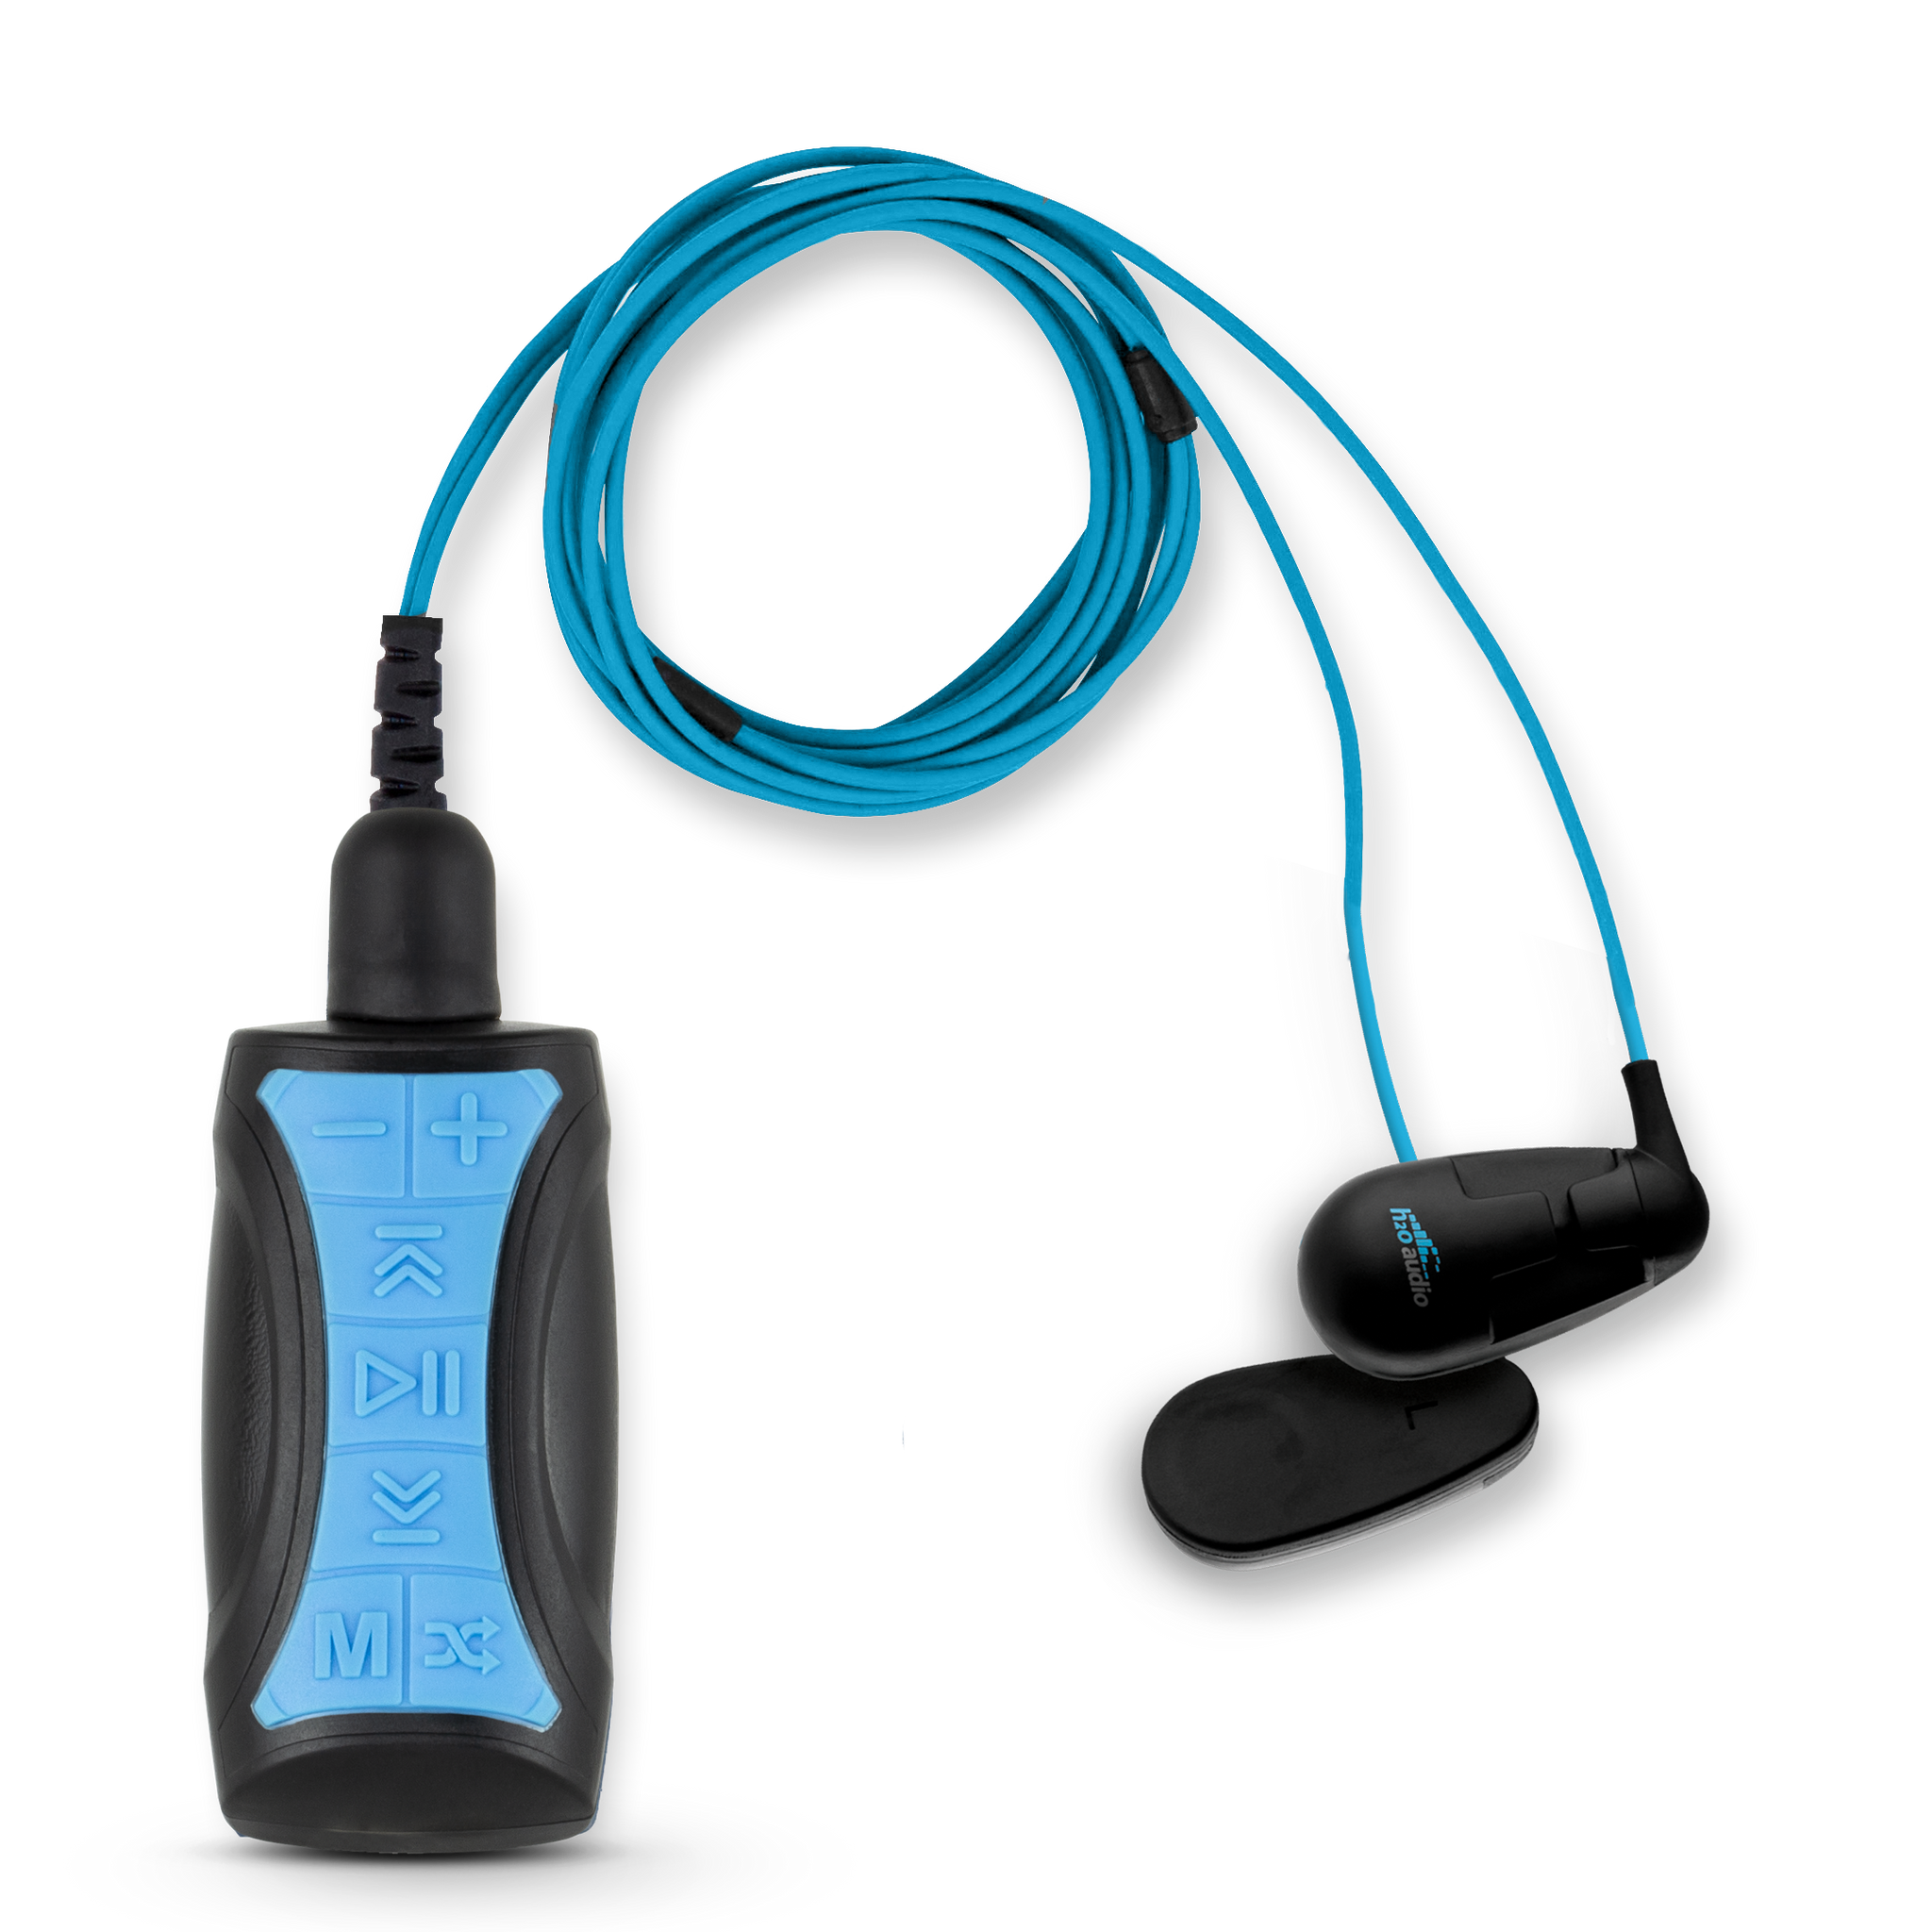 Waterproof MP3 player with Bone Conduction Headphones for Swimming - H2O  Audio